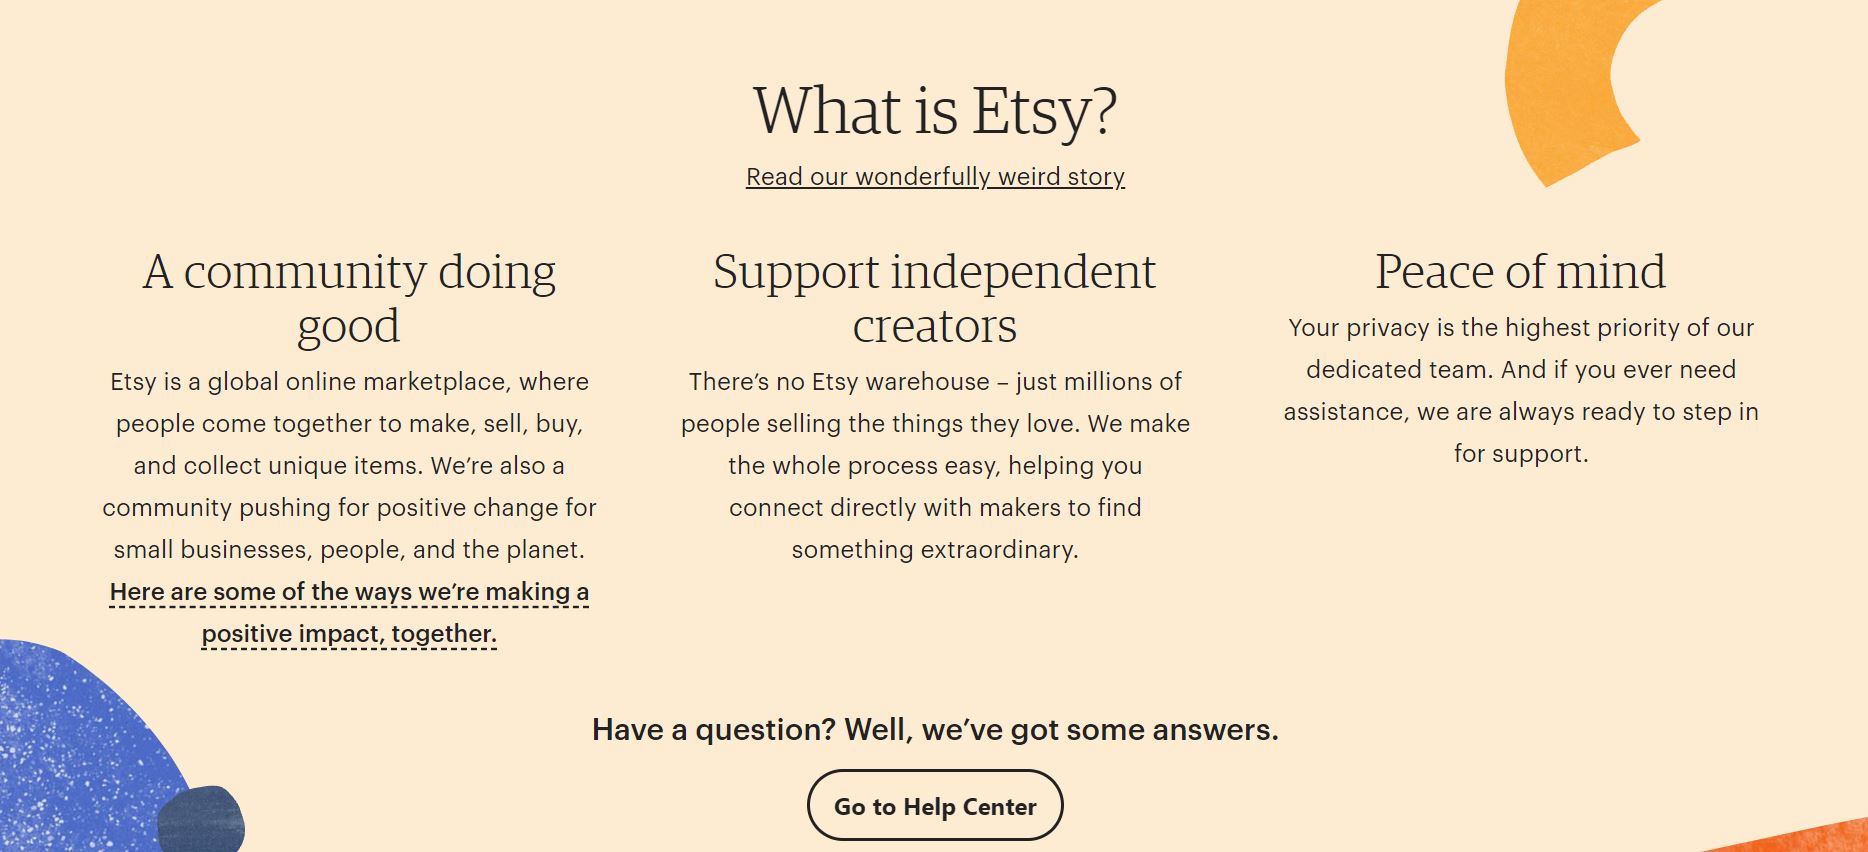 Etsy product / service